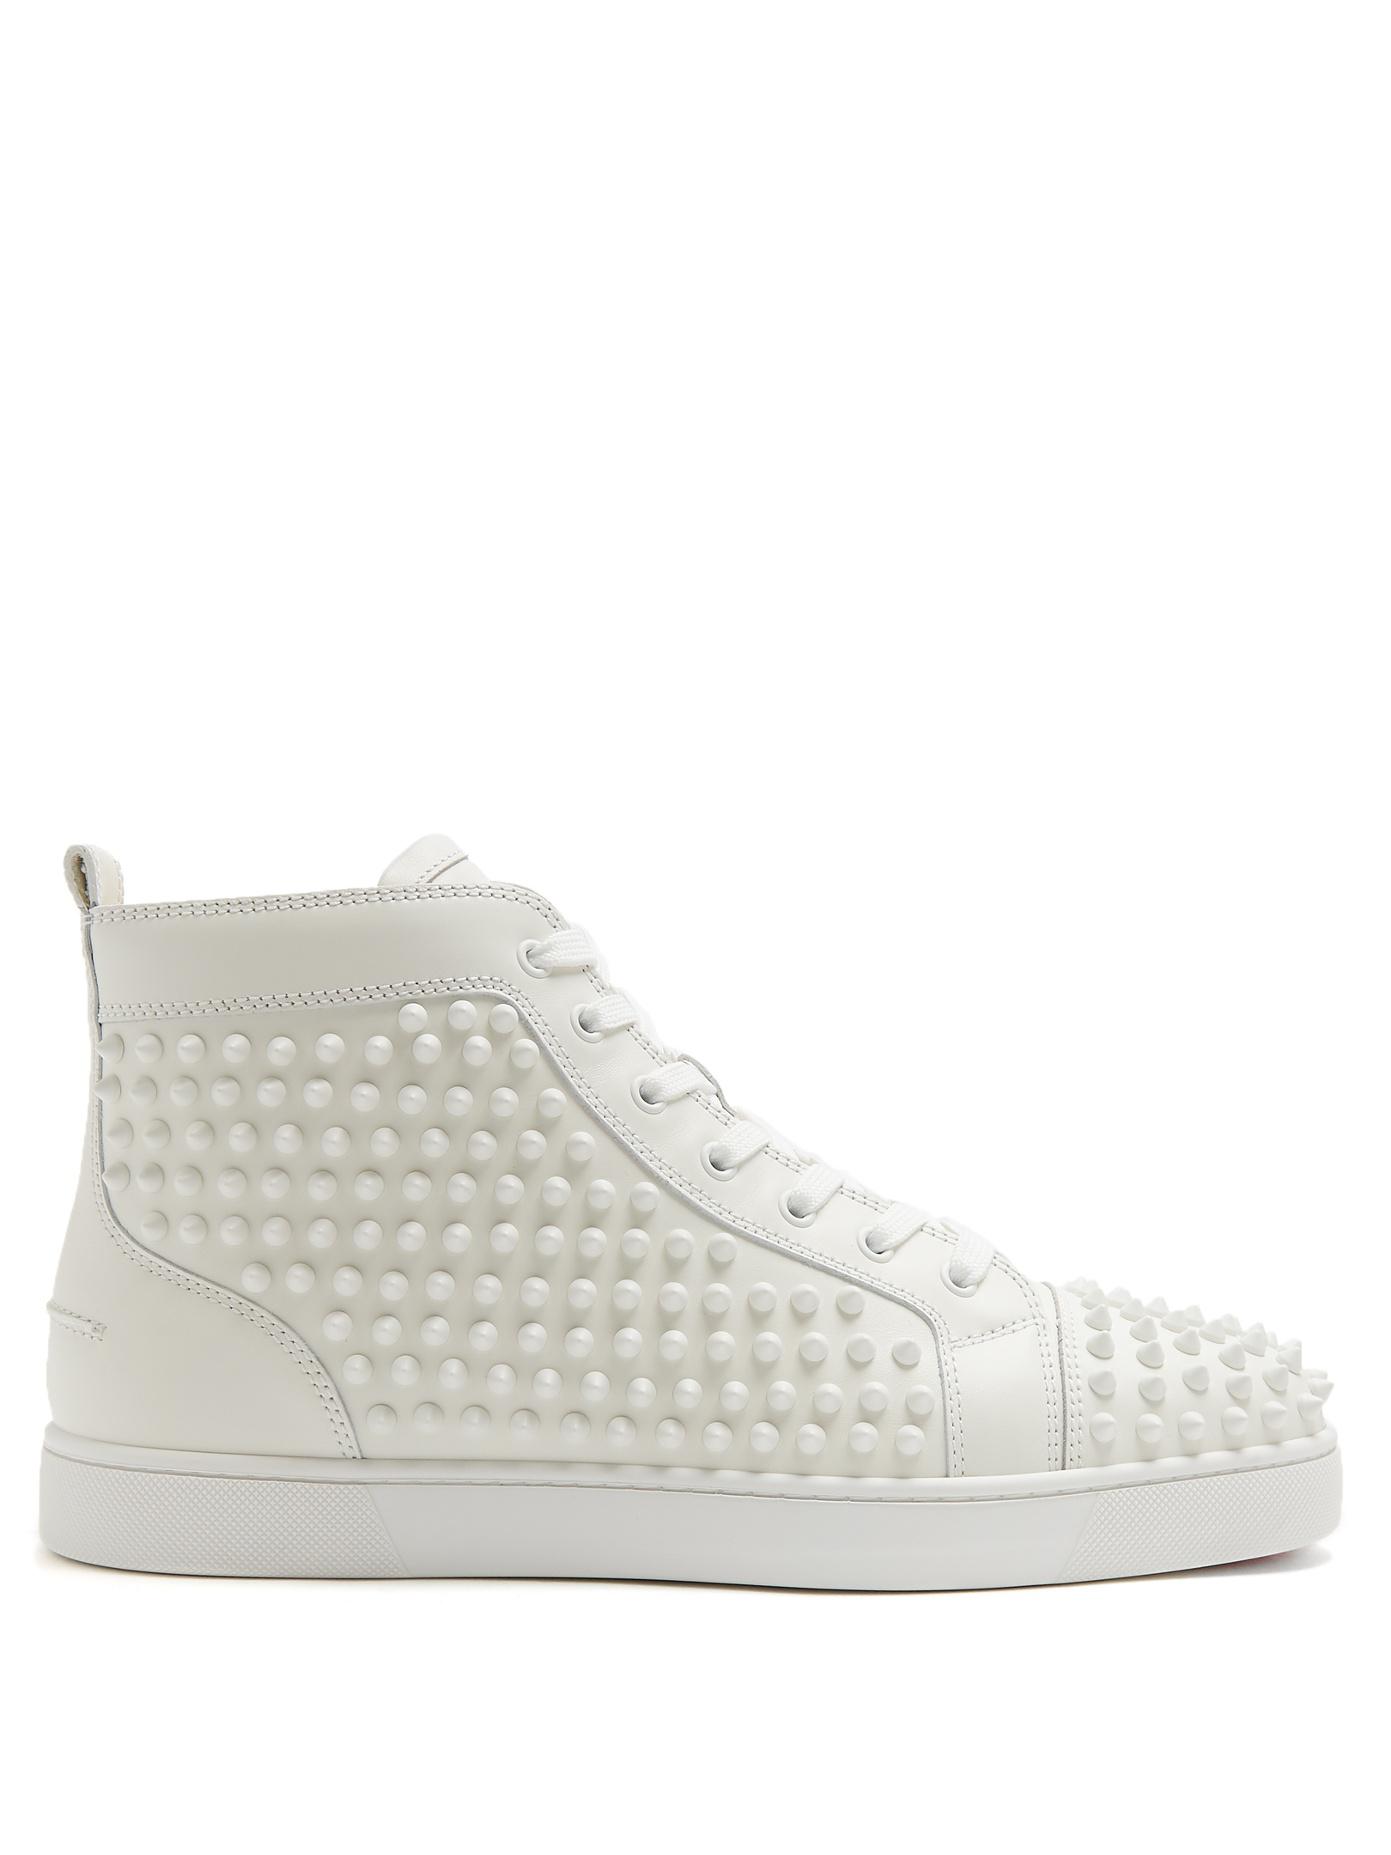 Christian Louboutin Leather Yang Louis High-top Spike-embellished ...